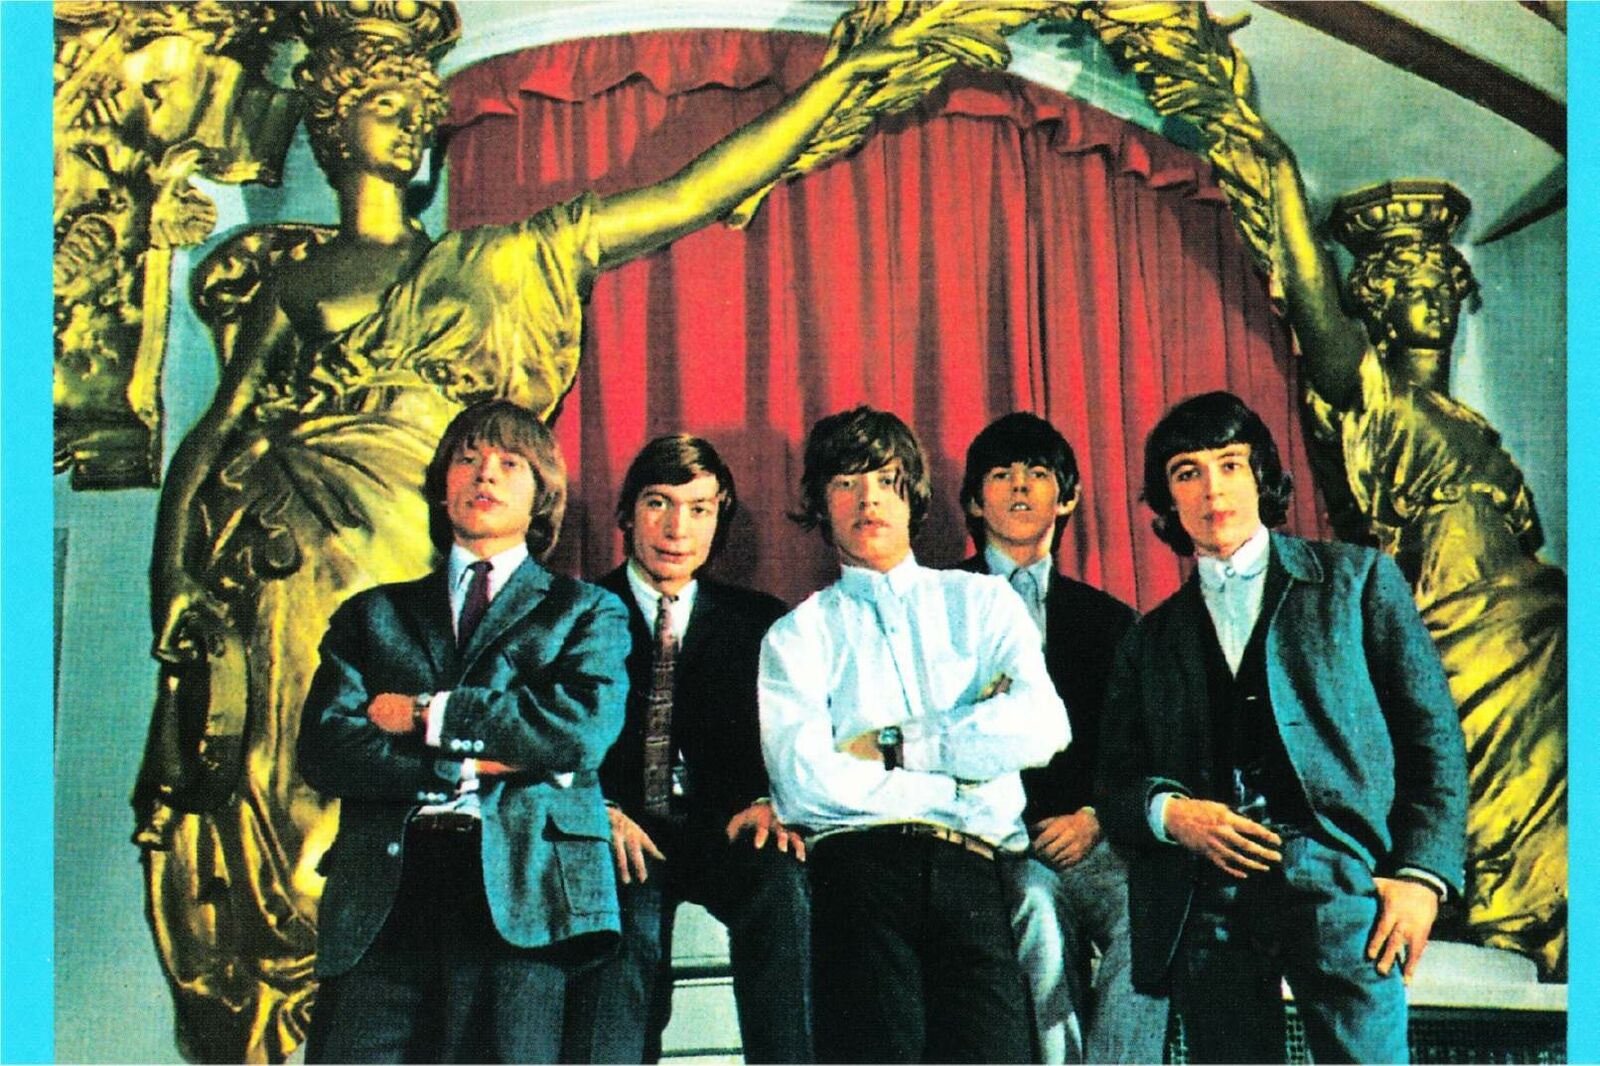 The Rolling Stones in the 1960s Group Portrait Modern Postcard #1